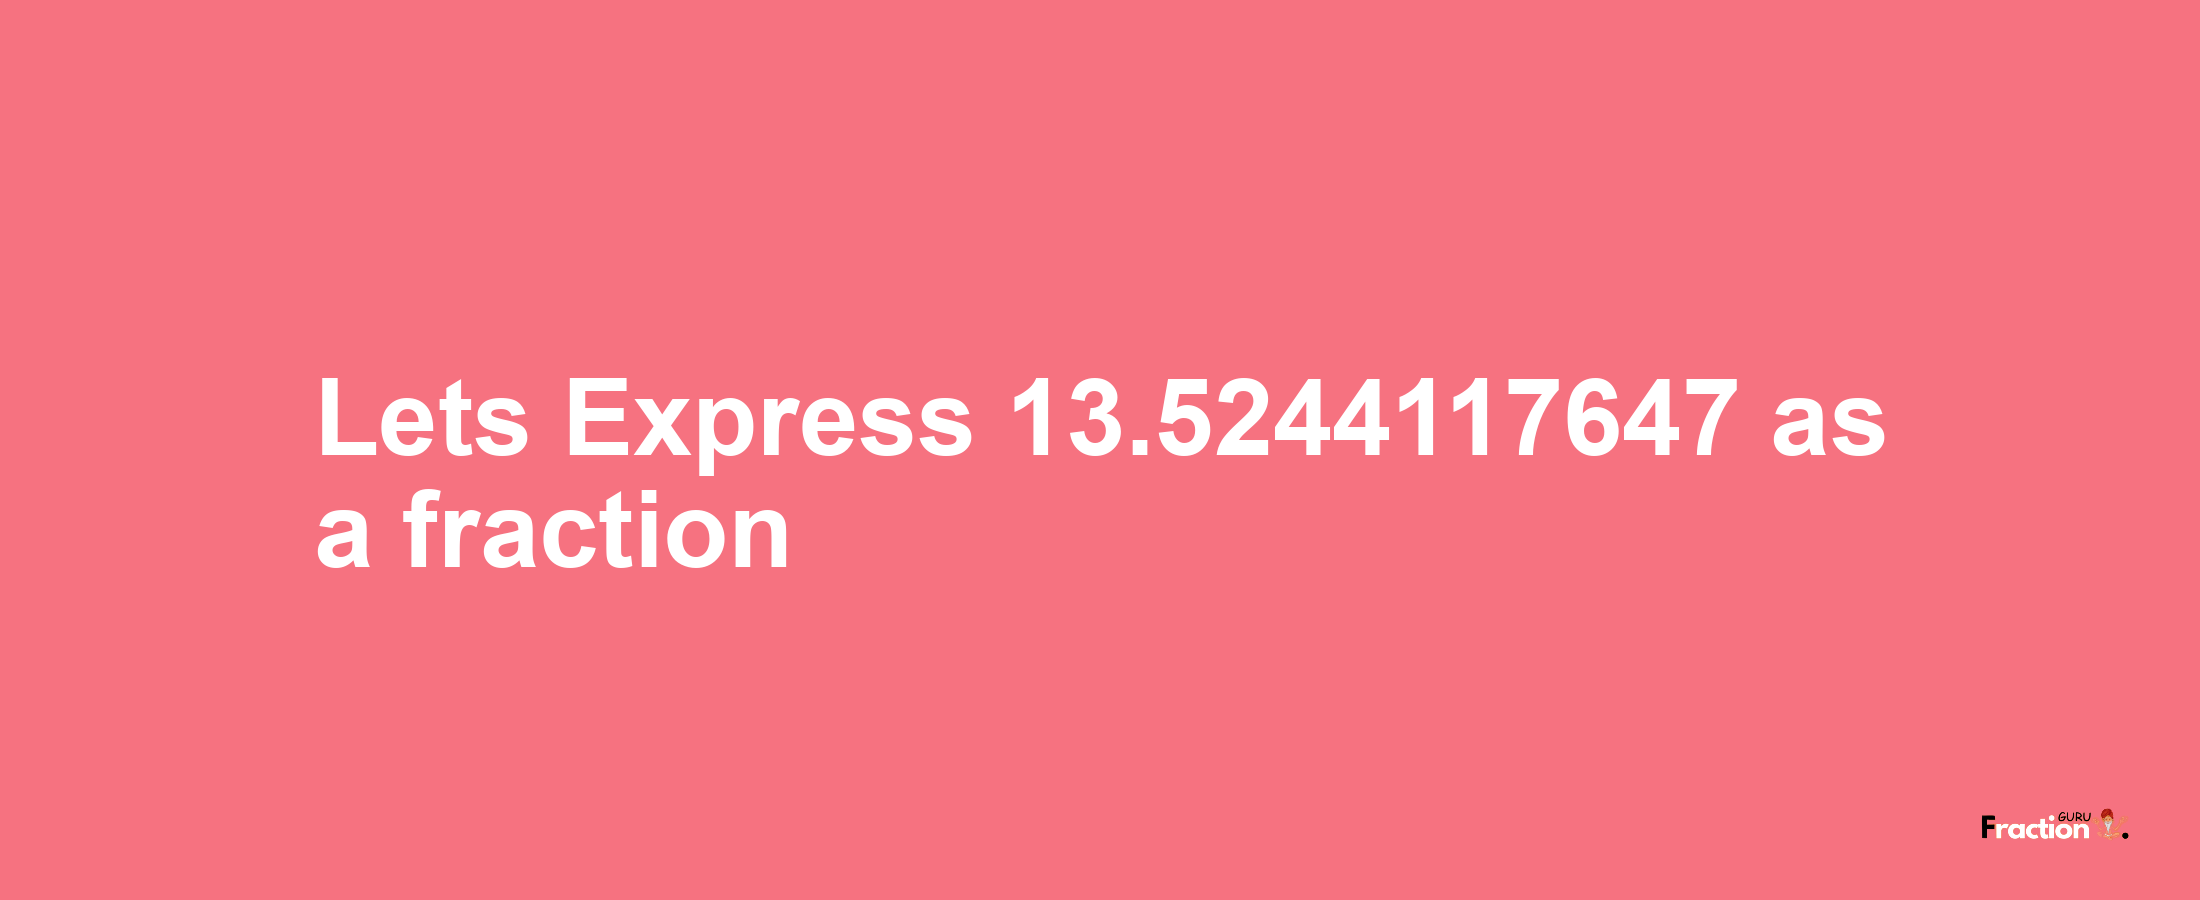 Lets Express 13.5244117647 as afraction